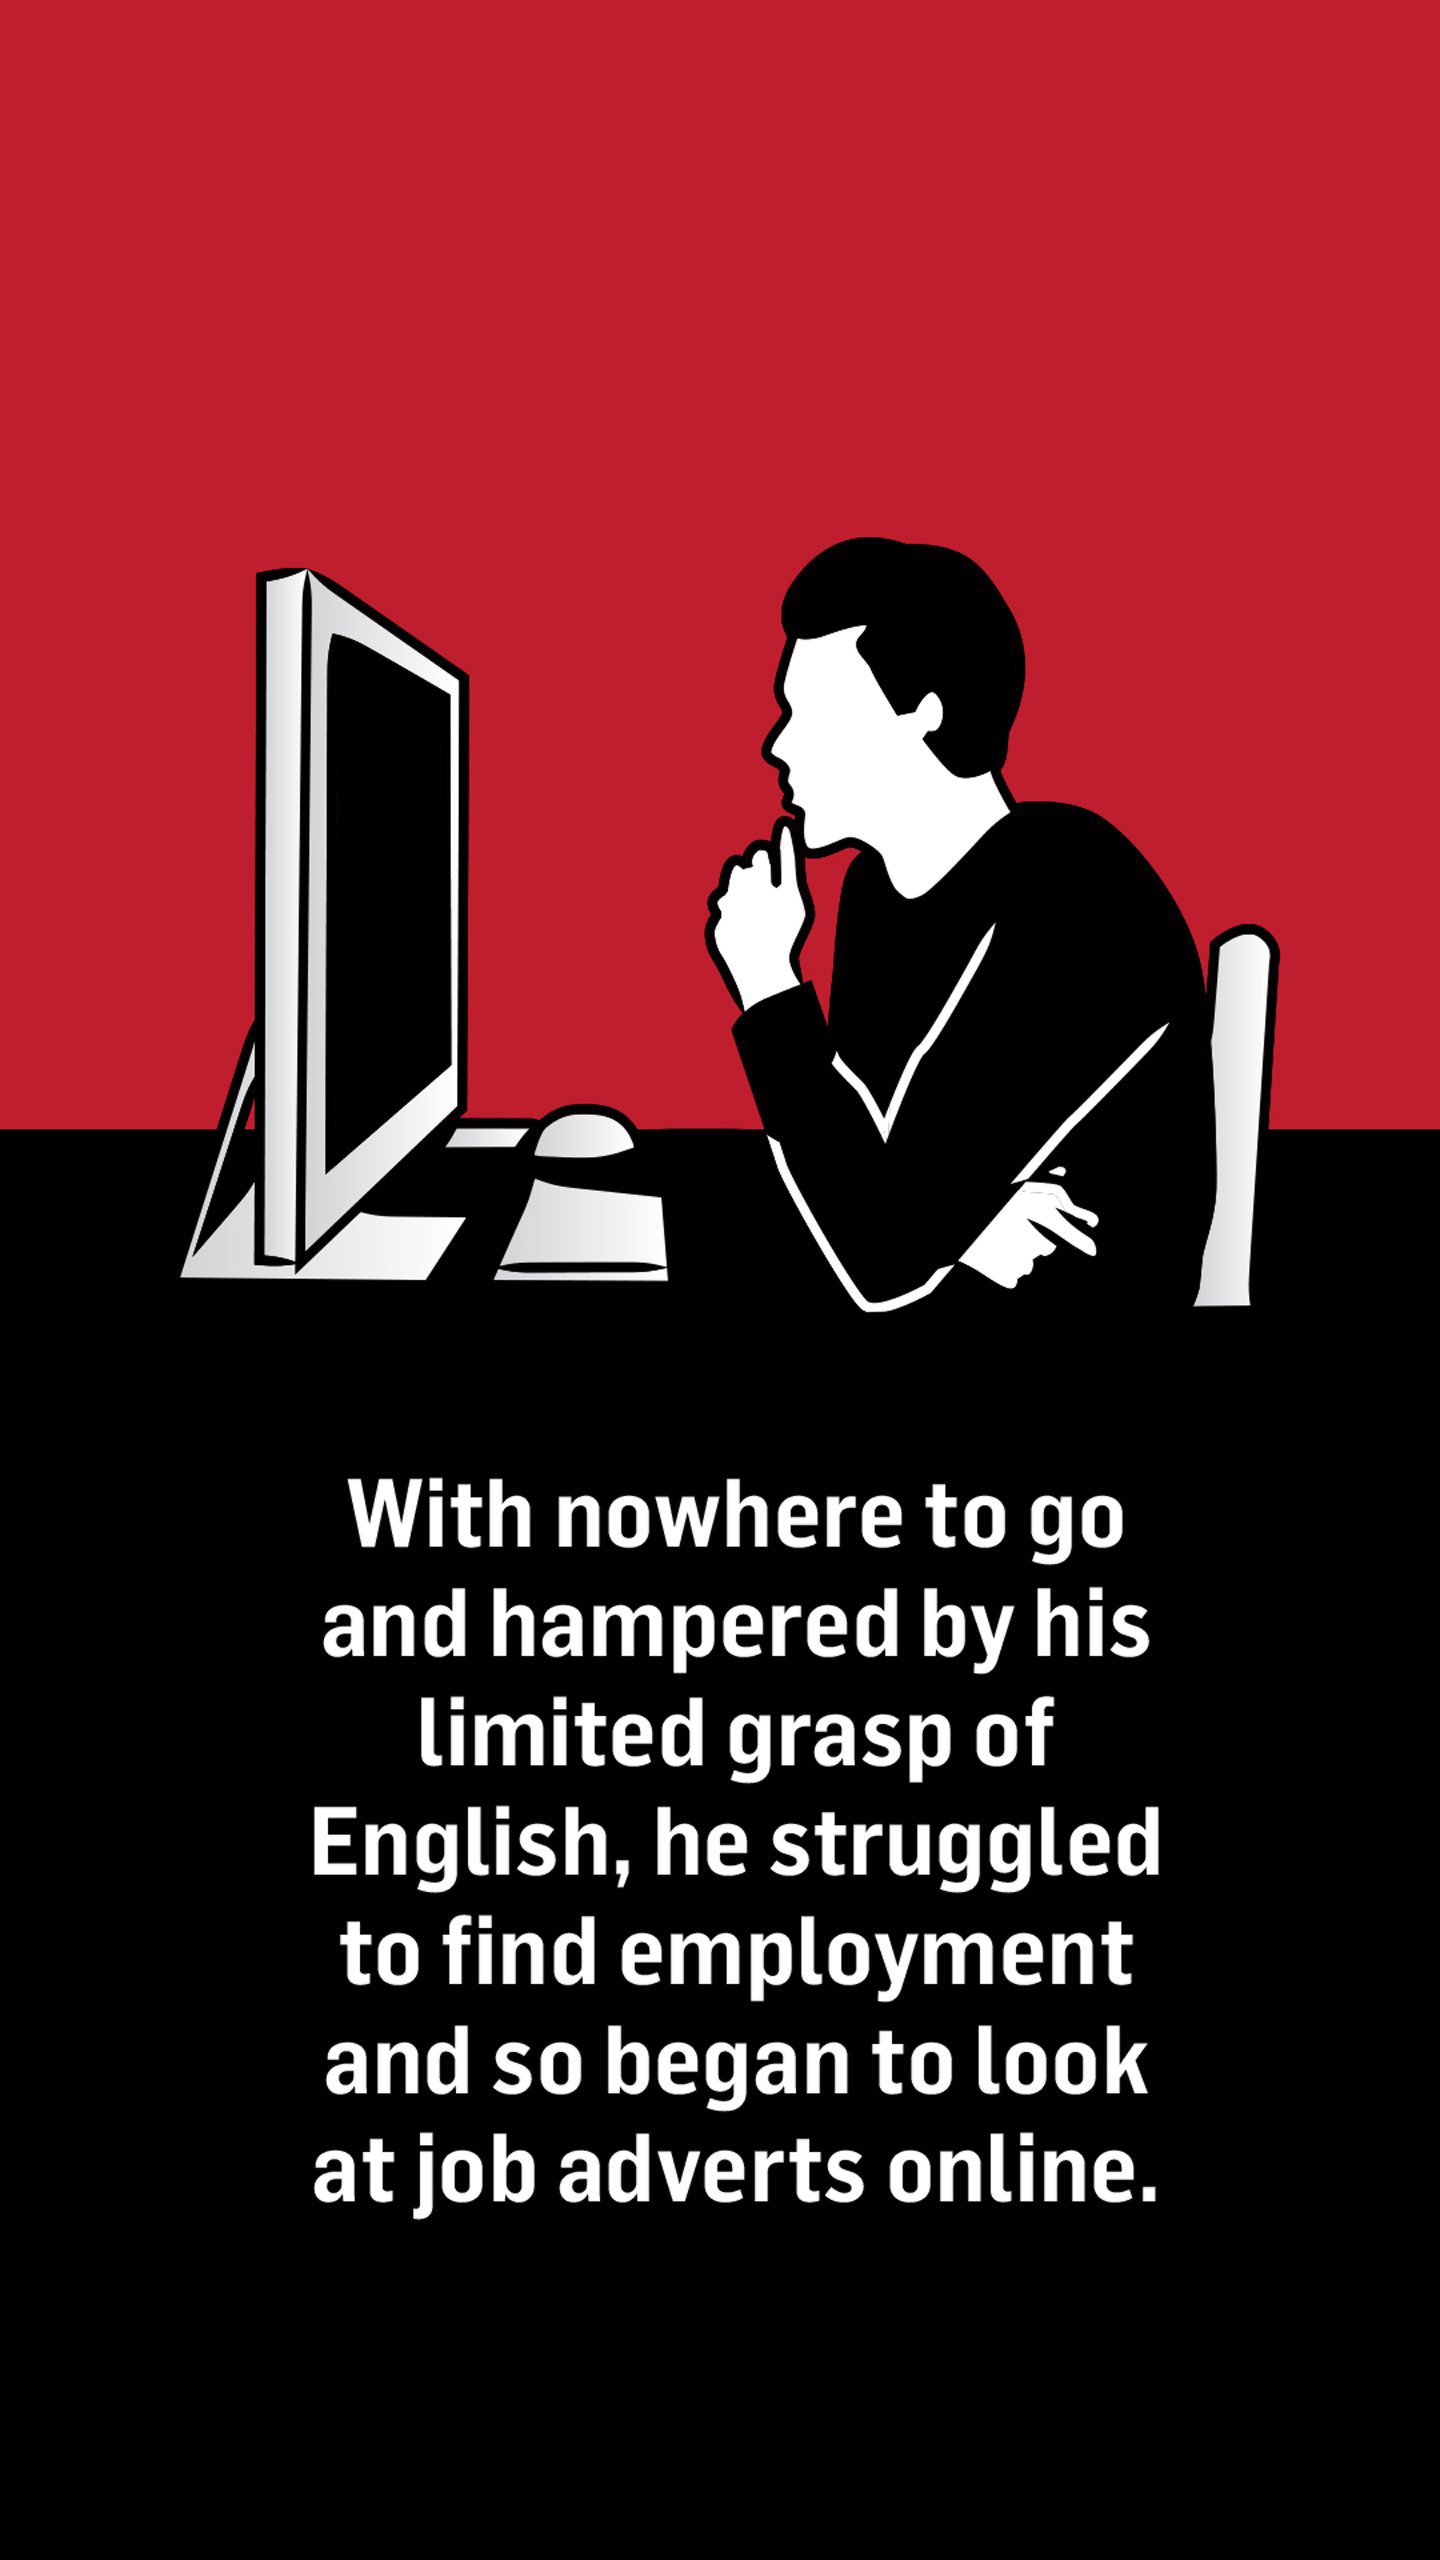 A drawing of a man sitting looking at a computer screen. Text reads: With nowhere to go and hampered by his limited grasp of English, he struggled to find employment and so began to look at job adverts online.